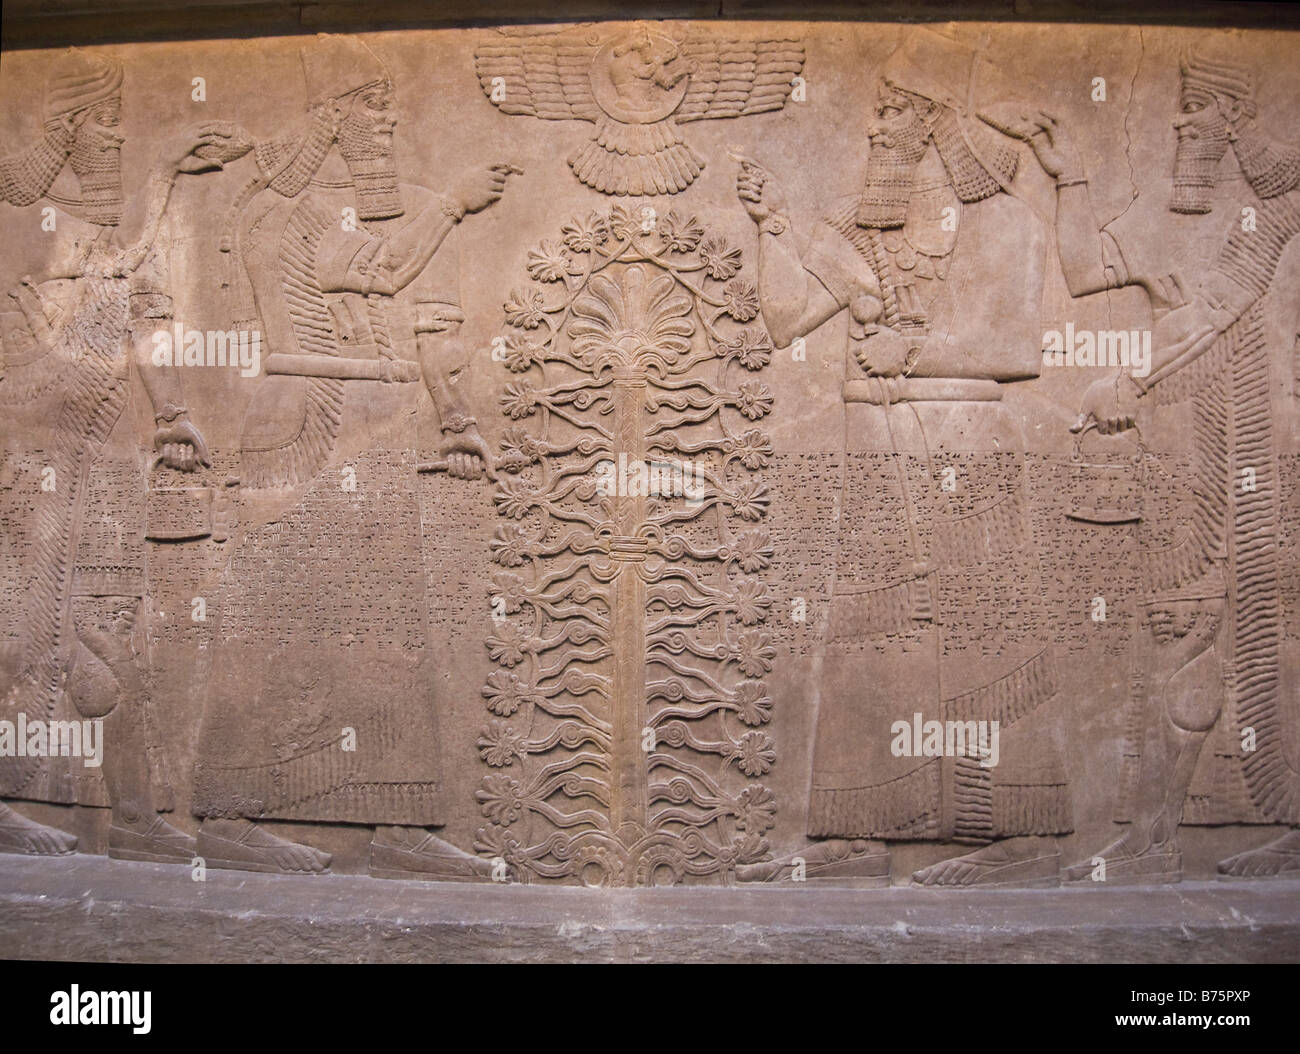 Assyrian King Ashurnasirpal appearing twice with Sacred Tree on gypsum carved panel Stock Photo